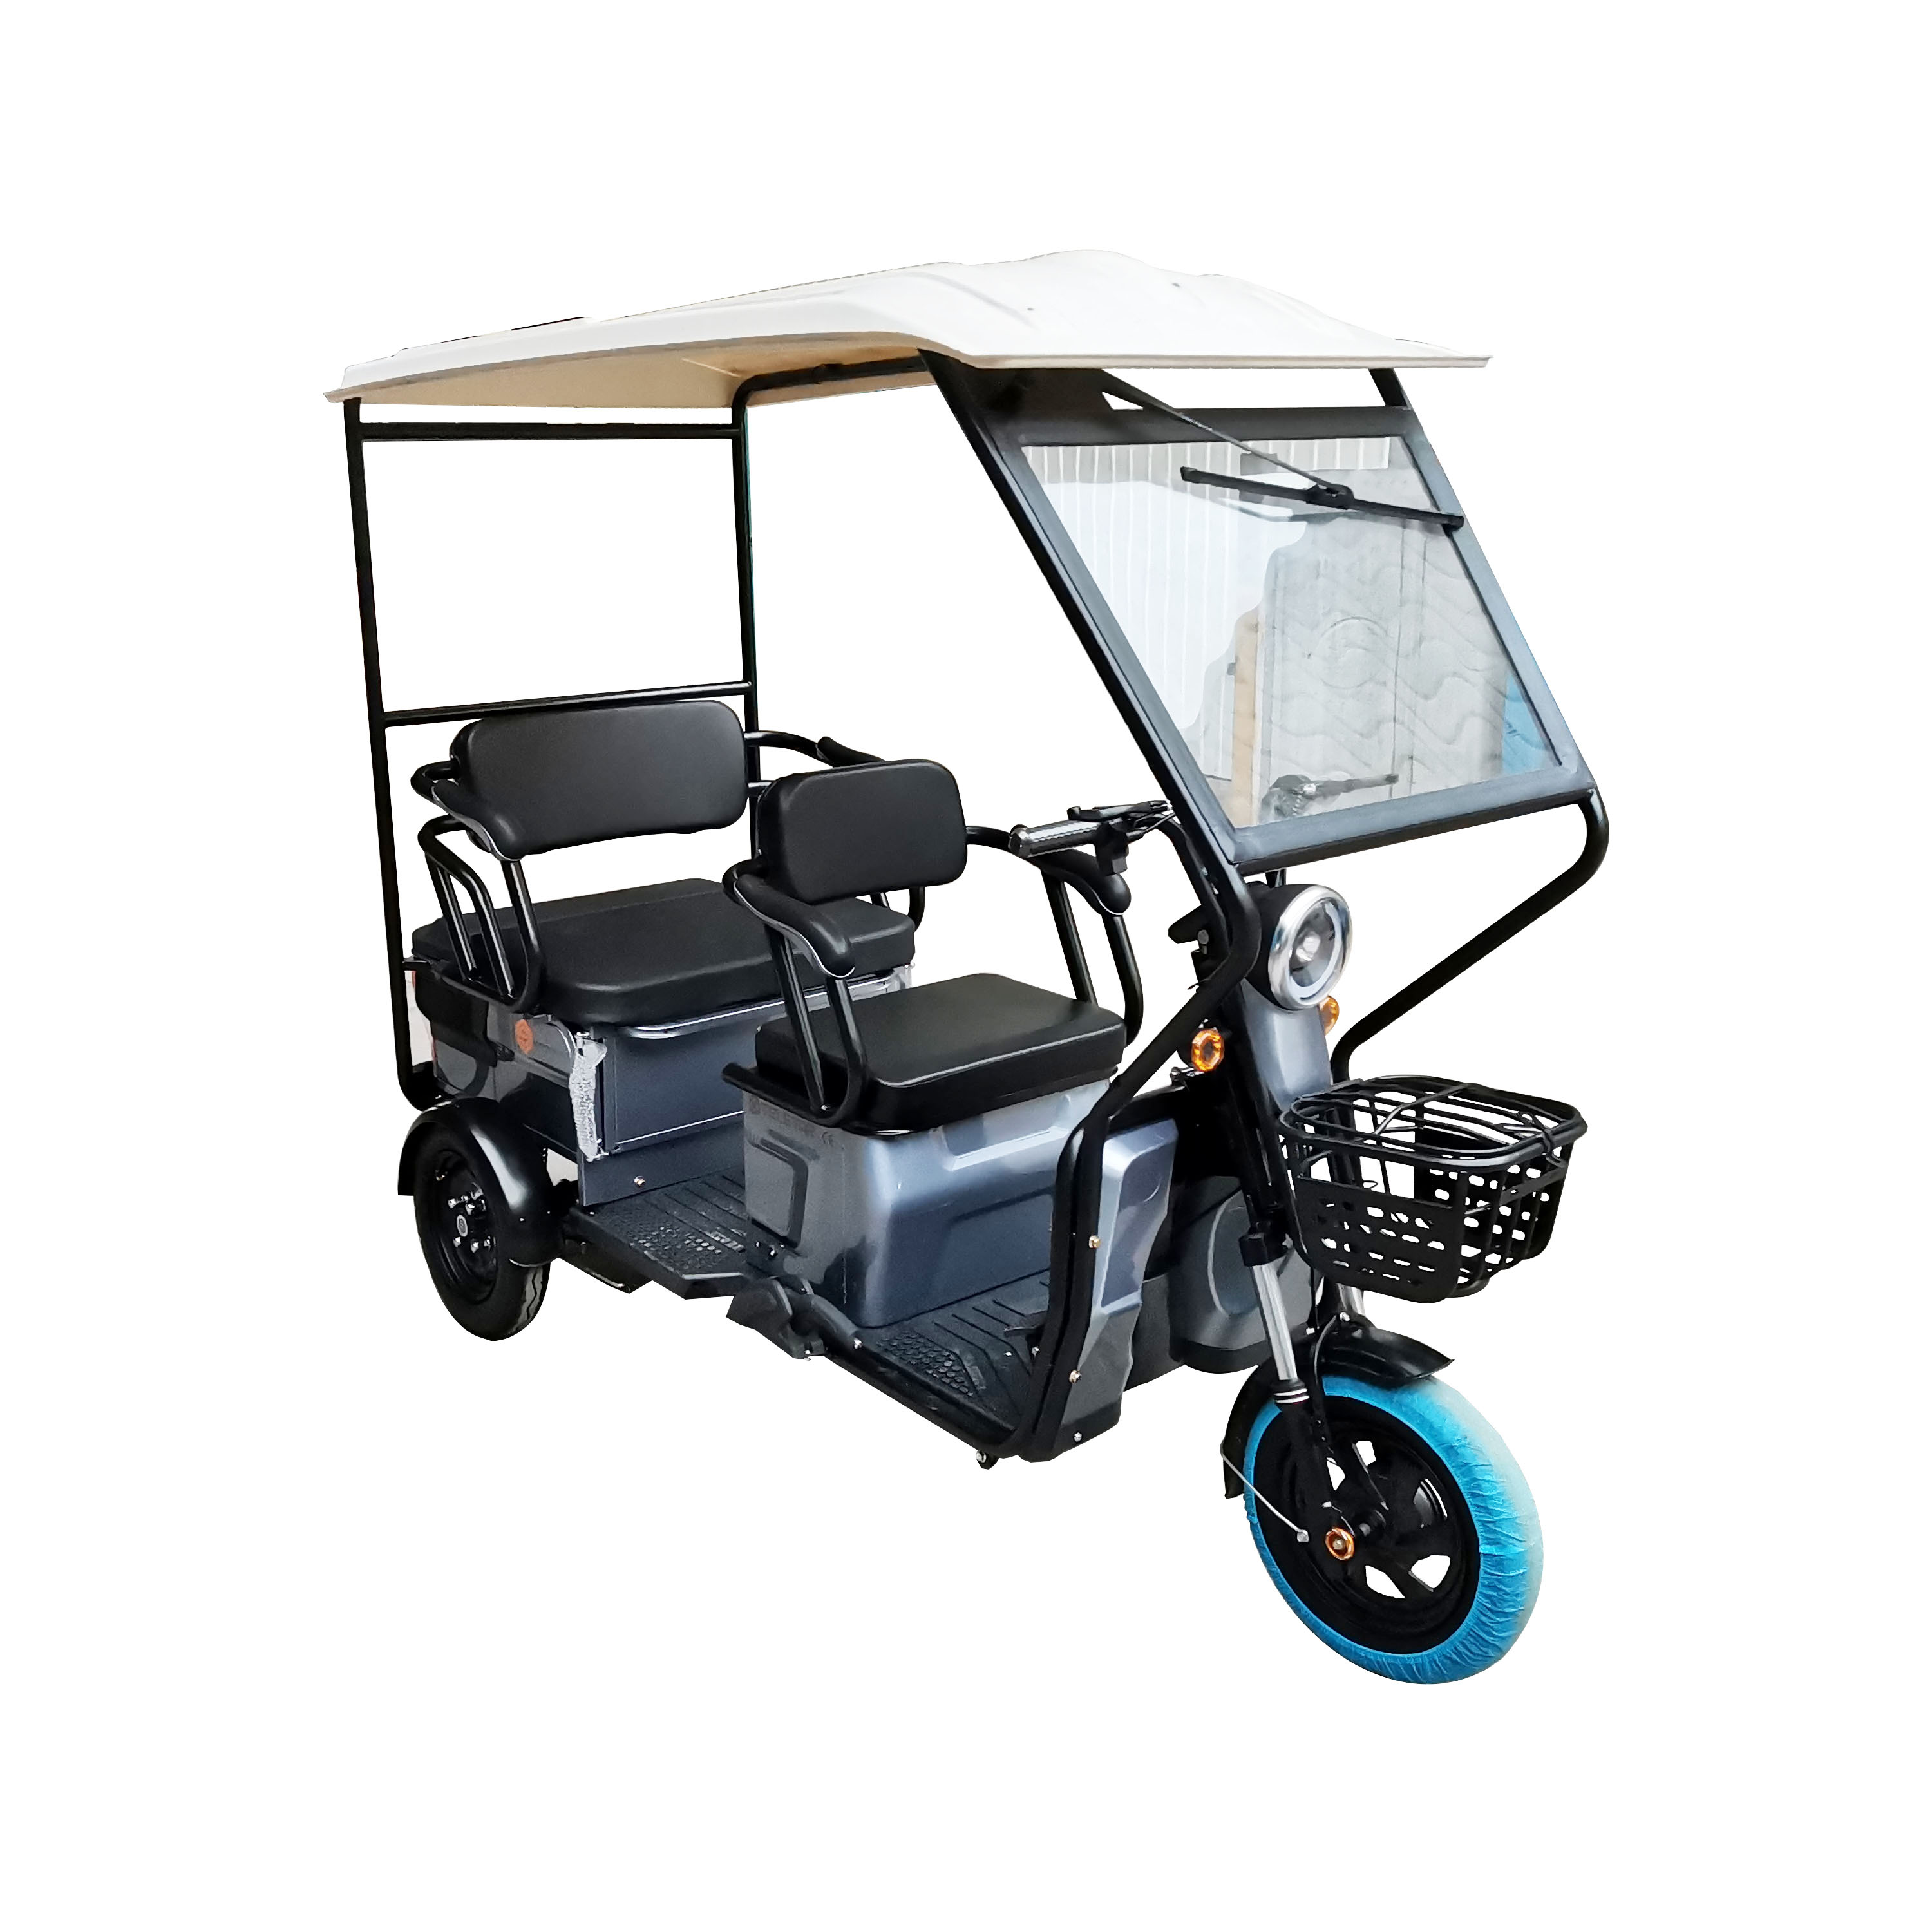 China Wholesale Tuk-Tuk Manufactures Suppliers - Small Size E Rickshaw Three-Wheelded Mobility Scooter With Seat for 3 People 3-Wheel 3 Passenger Scooter – Qiangsheng